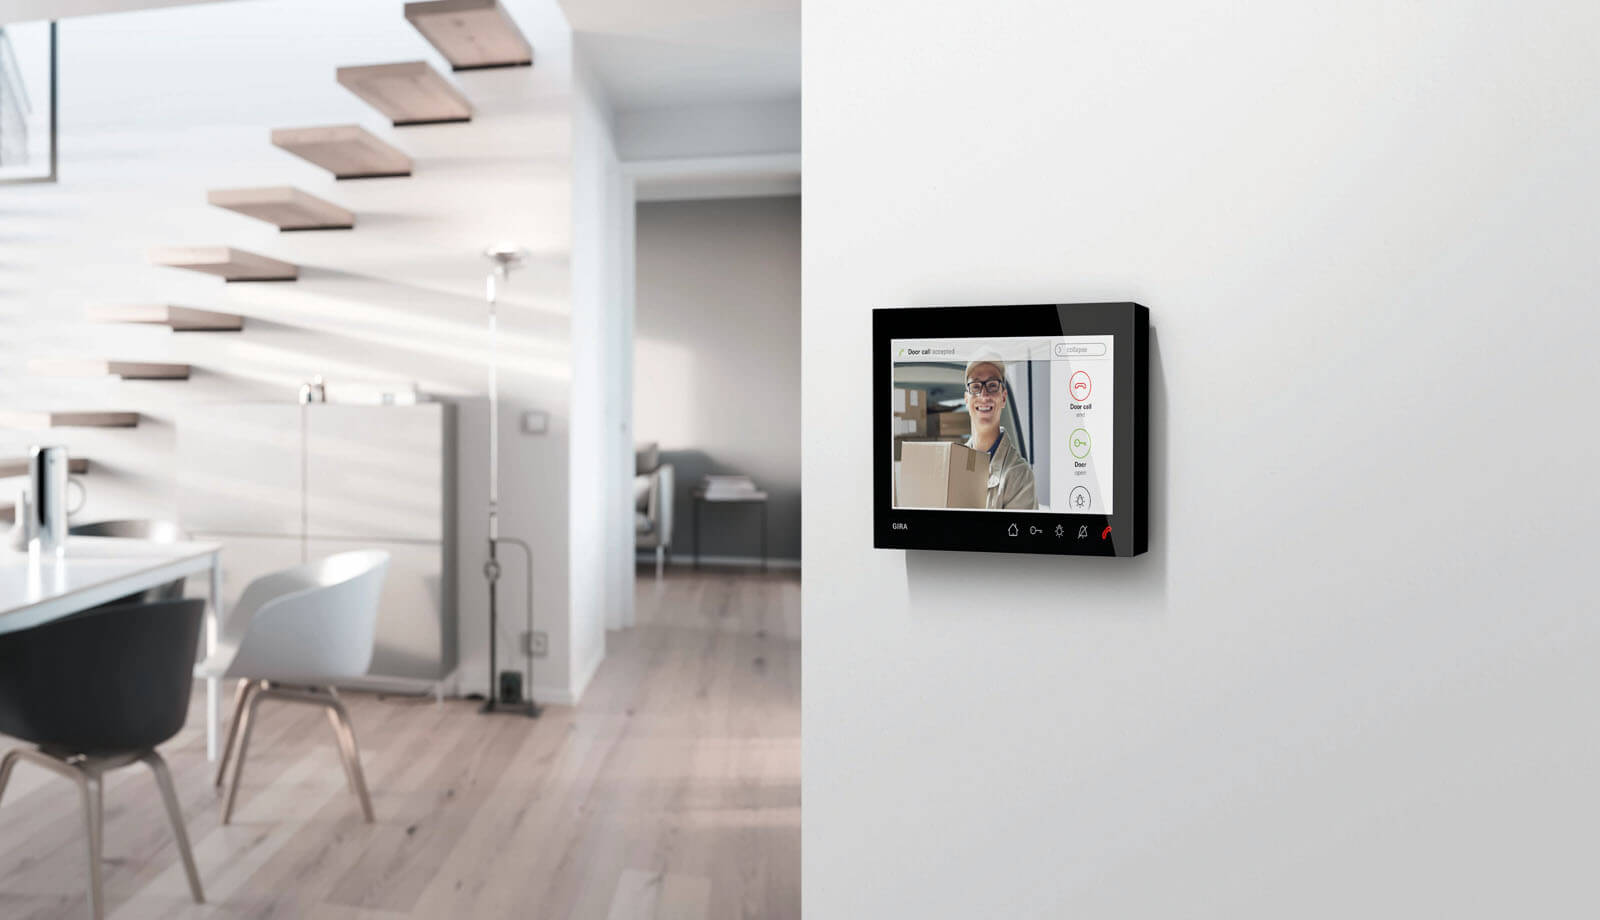 See who's at the door before you open it: the Gira home station video 7 has a 7" high-resolution display.